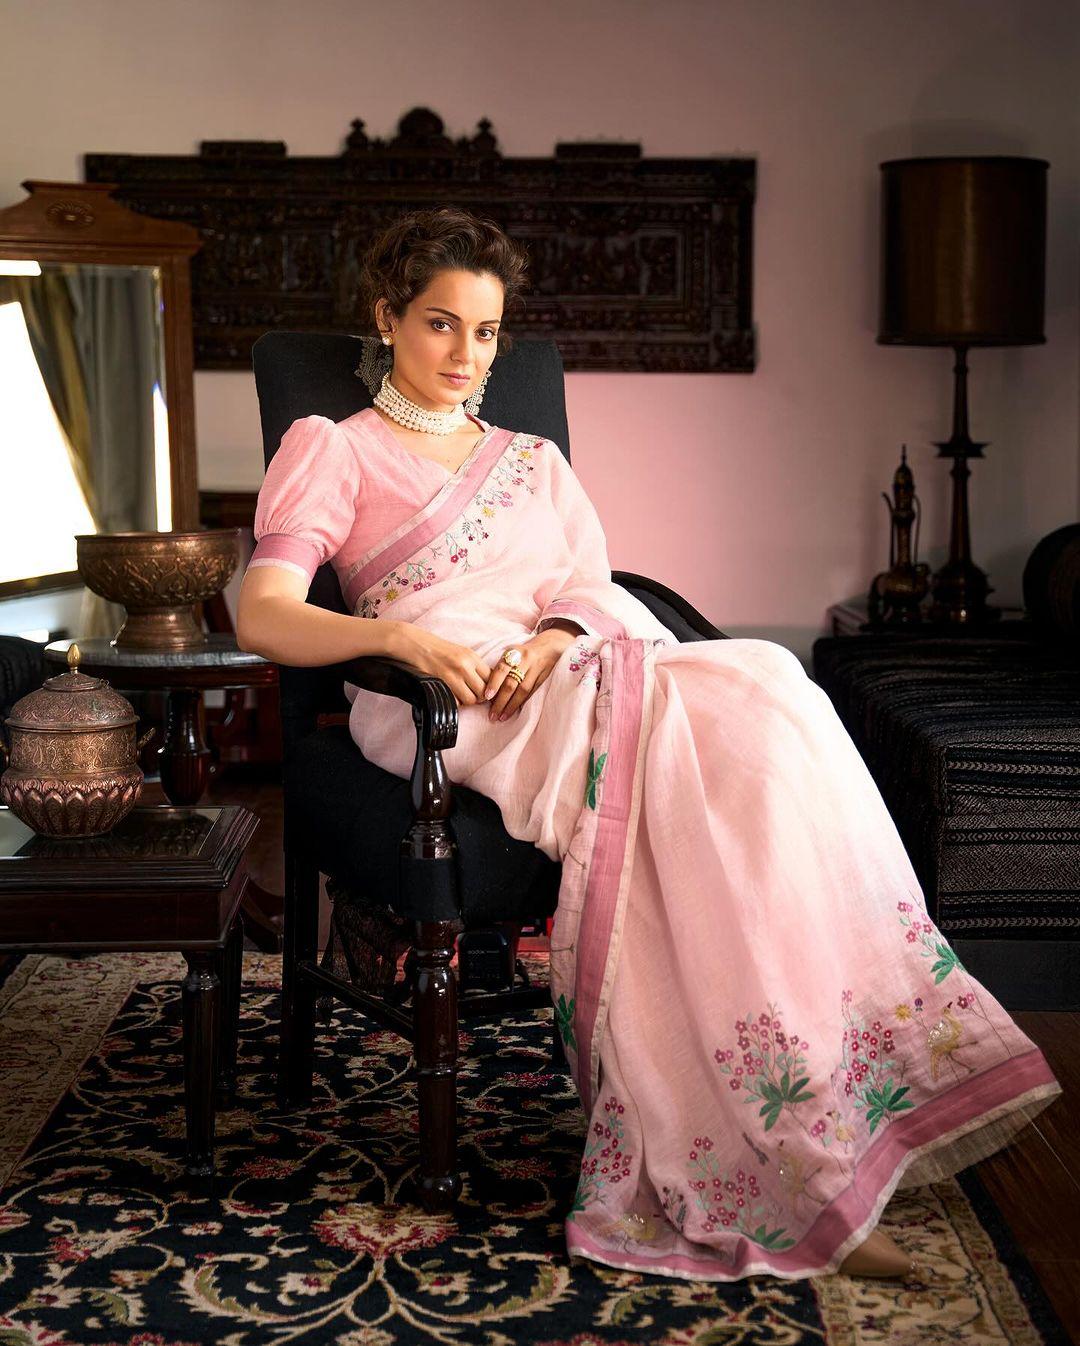 Feeling like wearing something light? Kangna's look has inspiration for you as well. The actress wore a beautiful pink saree with a stylish print on the border